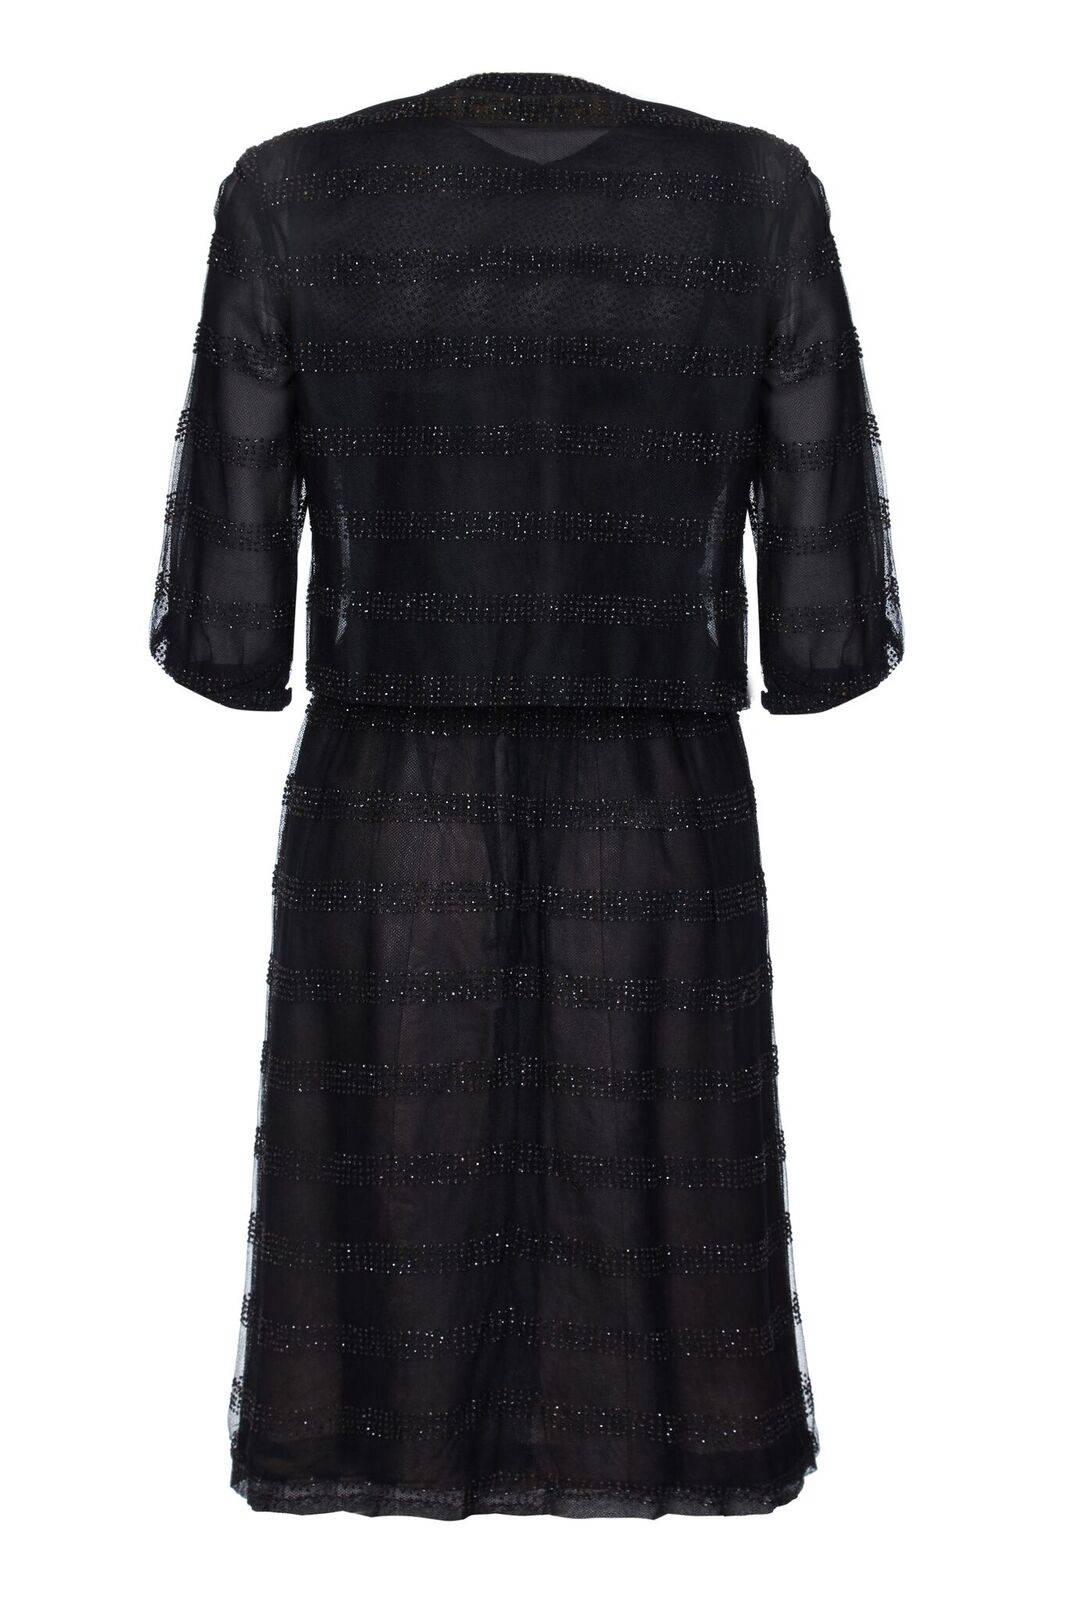 This captivating mid to late 1950s Christian Dior dress with matching jacket is of exceptional quality and in superb vintage condition. The dress has a Harrods of London label in addition to the Dior Modelé Original label sewn into the underlay. The